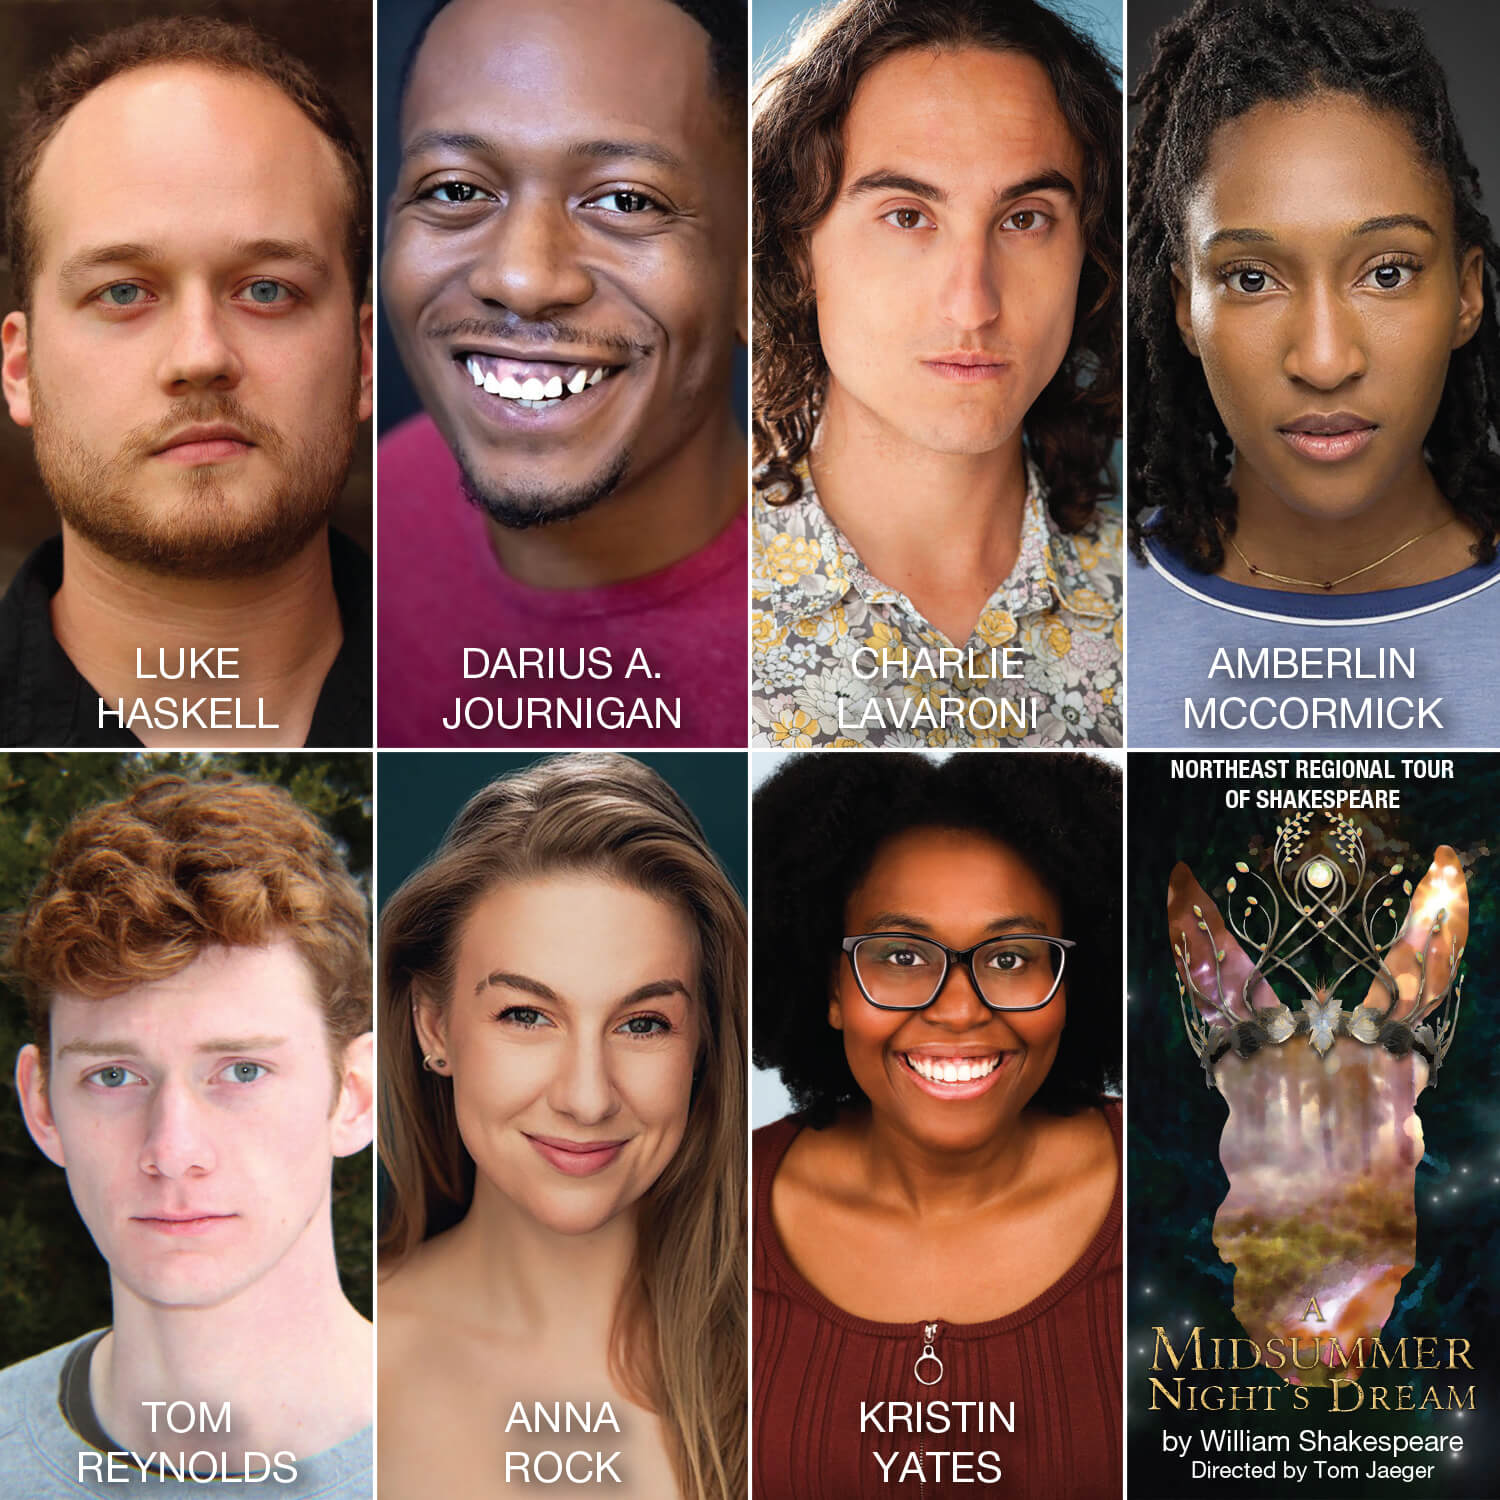 Cast Announced for Northeast Regional Tour of Shakespeare’s A Midsummer Night’s Dream